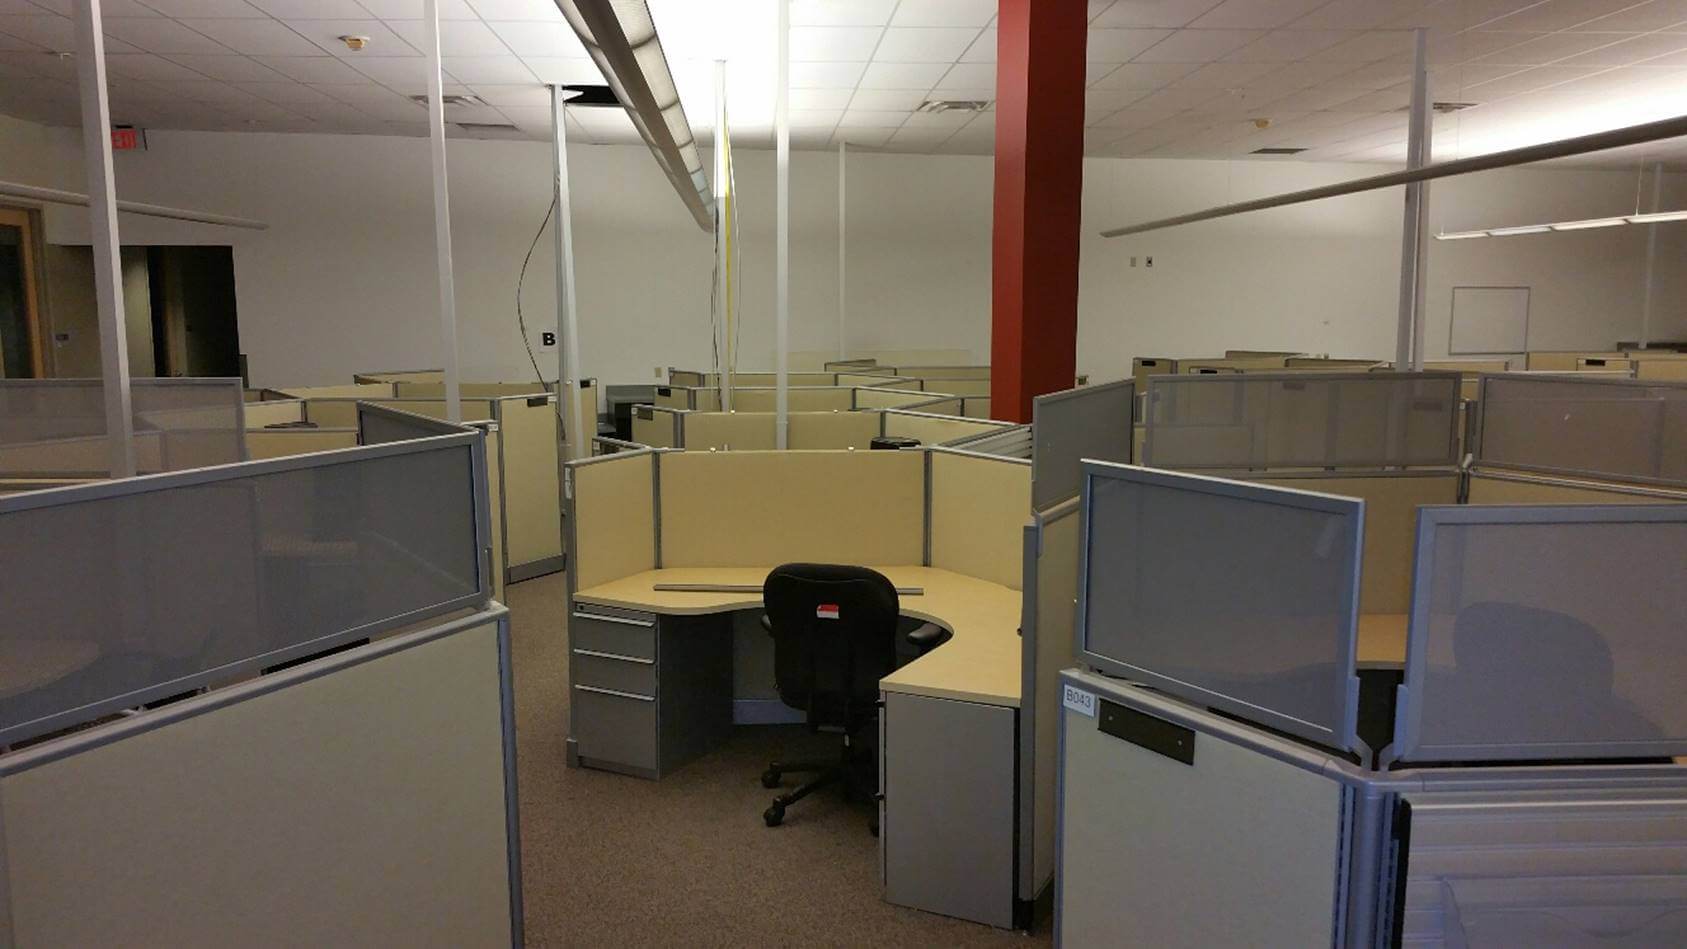 Used cubicles with Medium panels from Knoll - 2-drawer filing pedestal and 3-drawer filing pedestal included